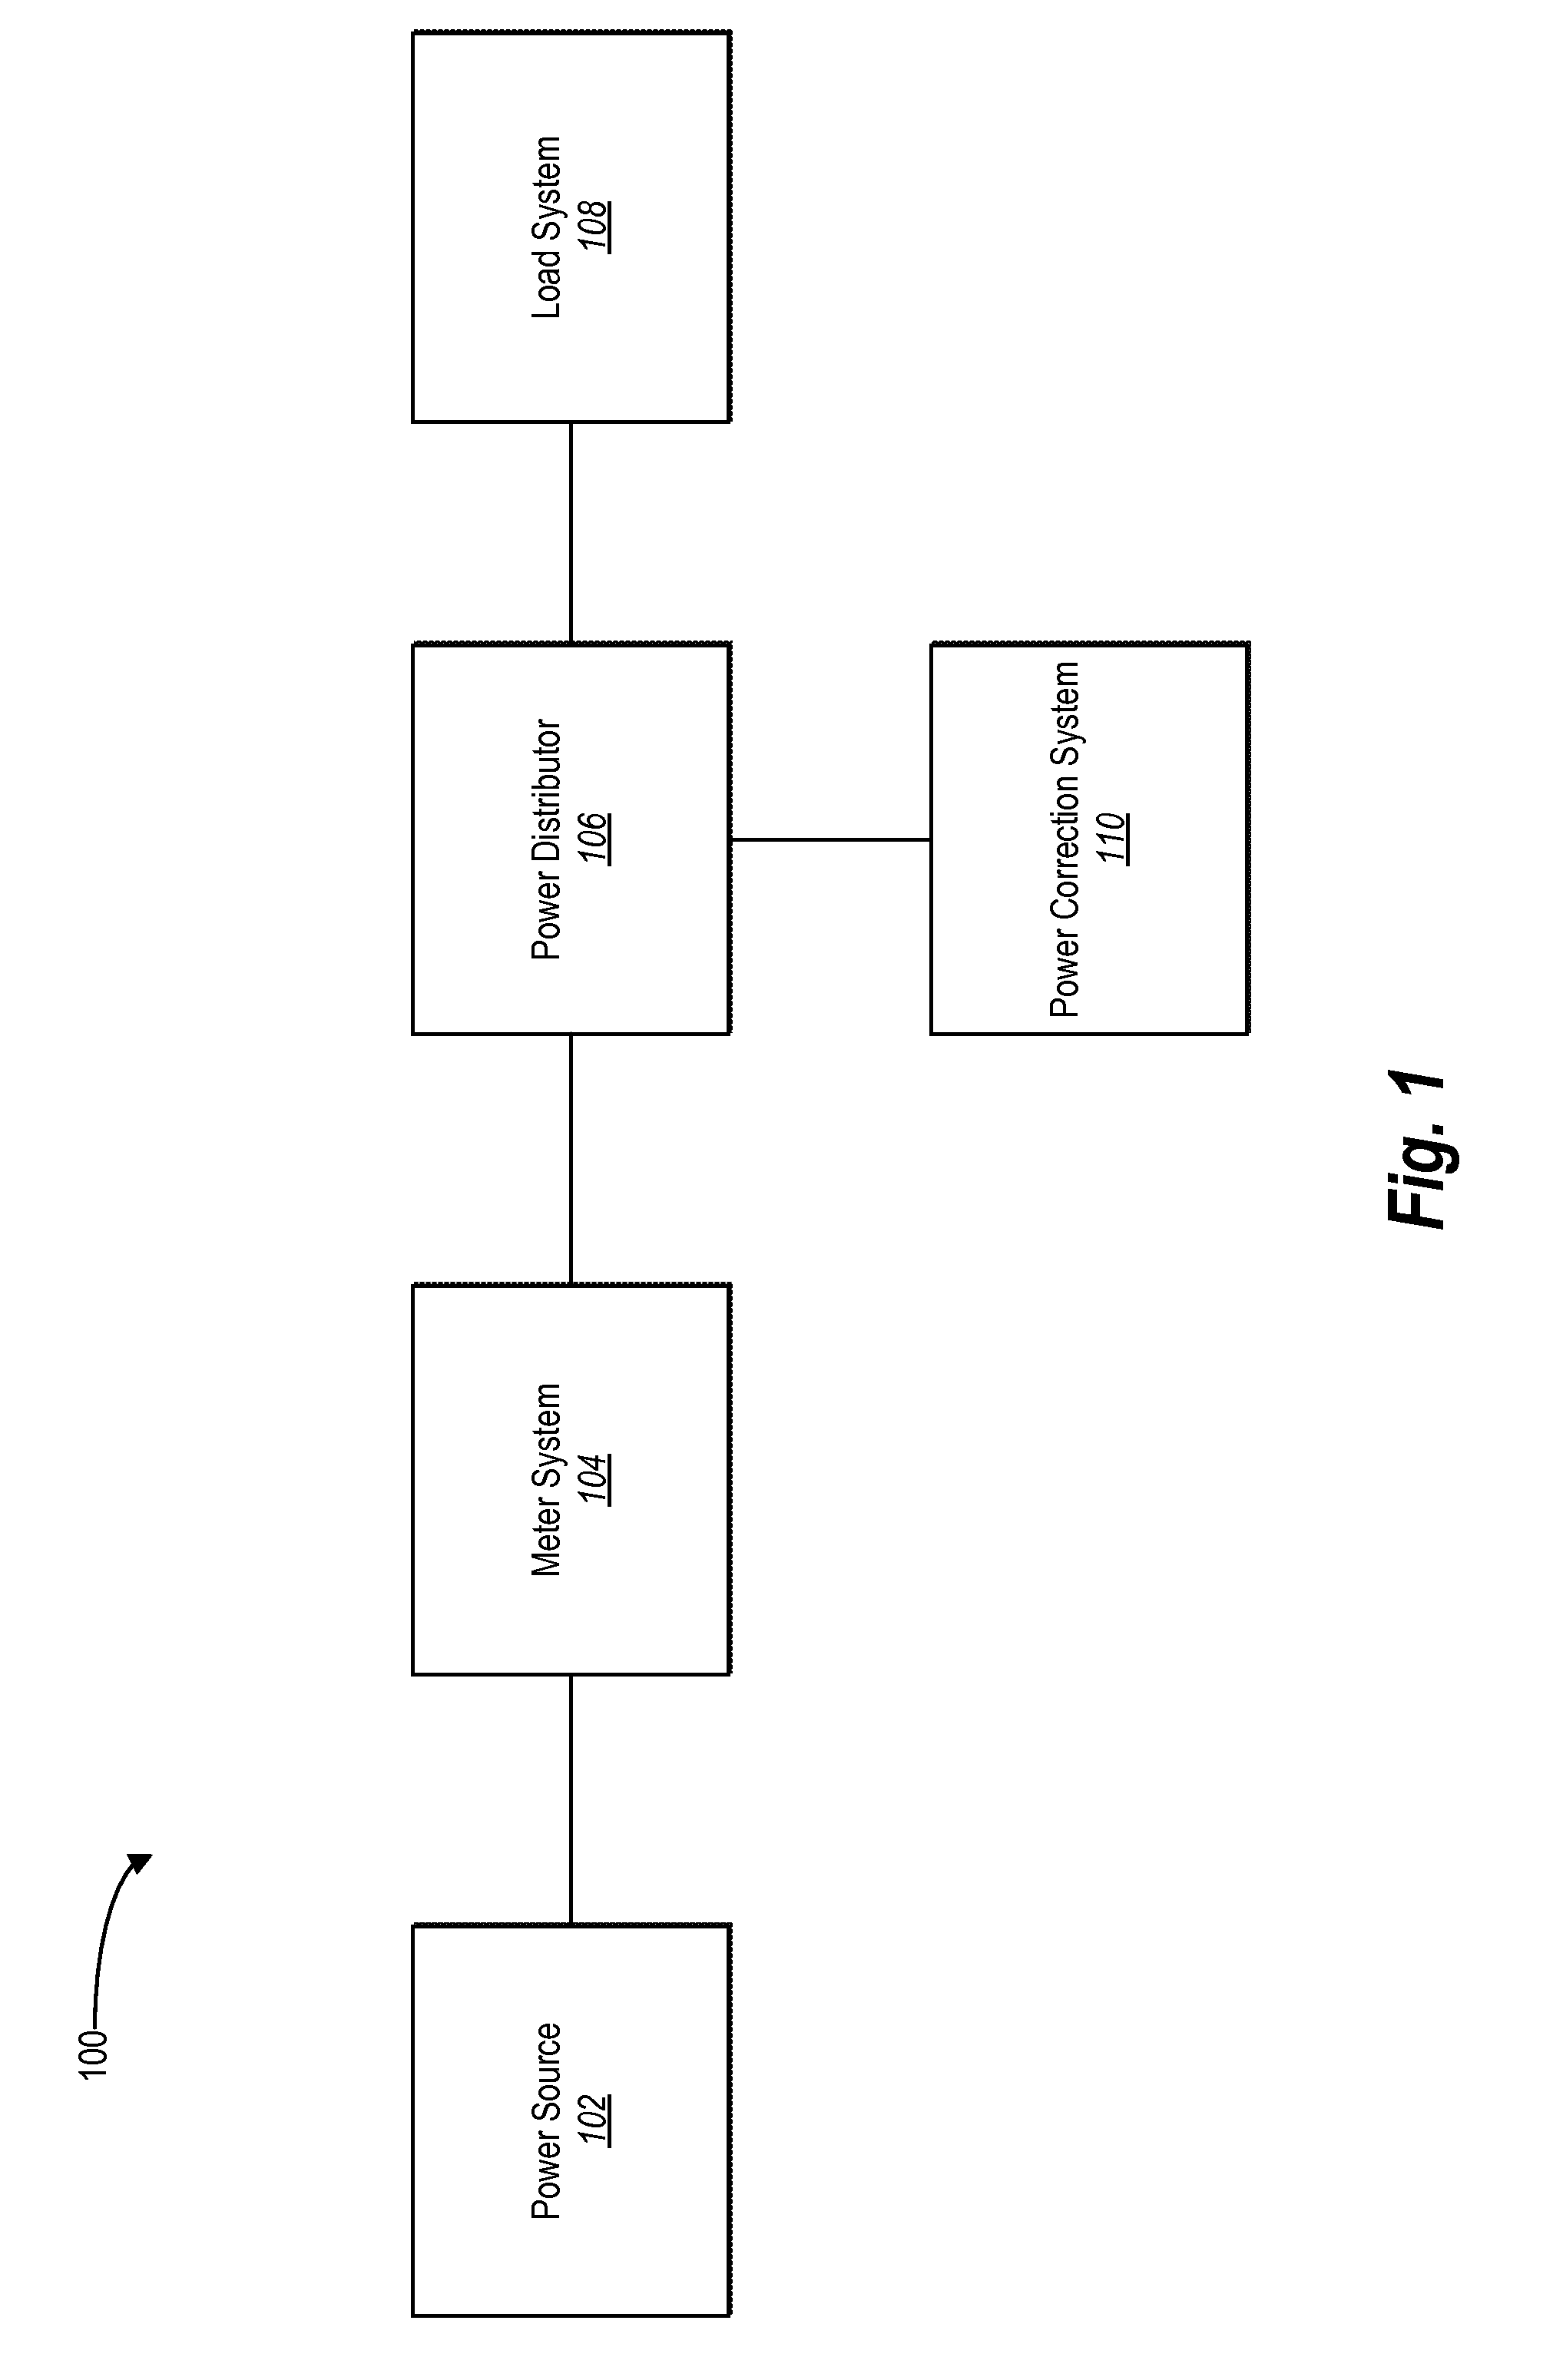 Electrical power supply system